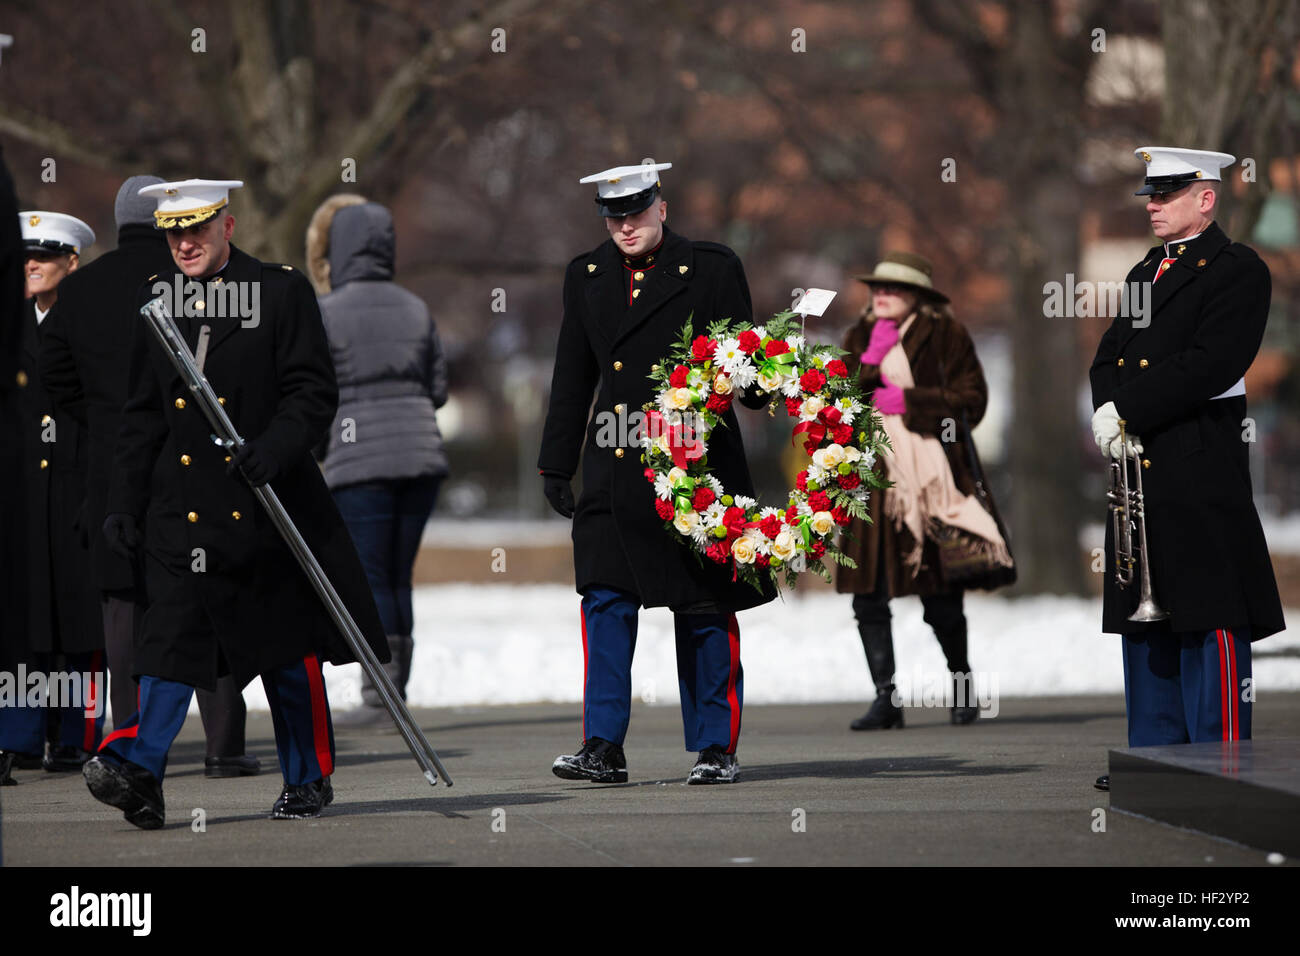 A Marine brings forth the ceremonial wreath during a rememberance ceremony at the Marine Corps War Memorial in Washington. The ceremony commemorated the 70th anniversary of the battle for Iwo Jima. With most of the surviving veterans in their 80’s and 90’s, surviving Marines visited the memorial in remembrance of their brothers in arms.  (U.S. Marine Corps photo by Cpl. Clayton Filiopwicz/Released) WWII Marine Veterans Remember Iwo Jima with Wreath Laying Ceremony 150219-M-LX723-004 Stock Photo